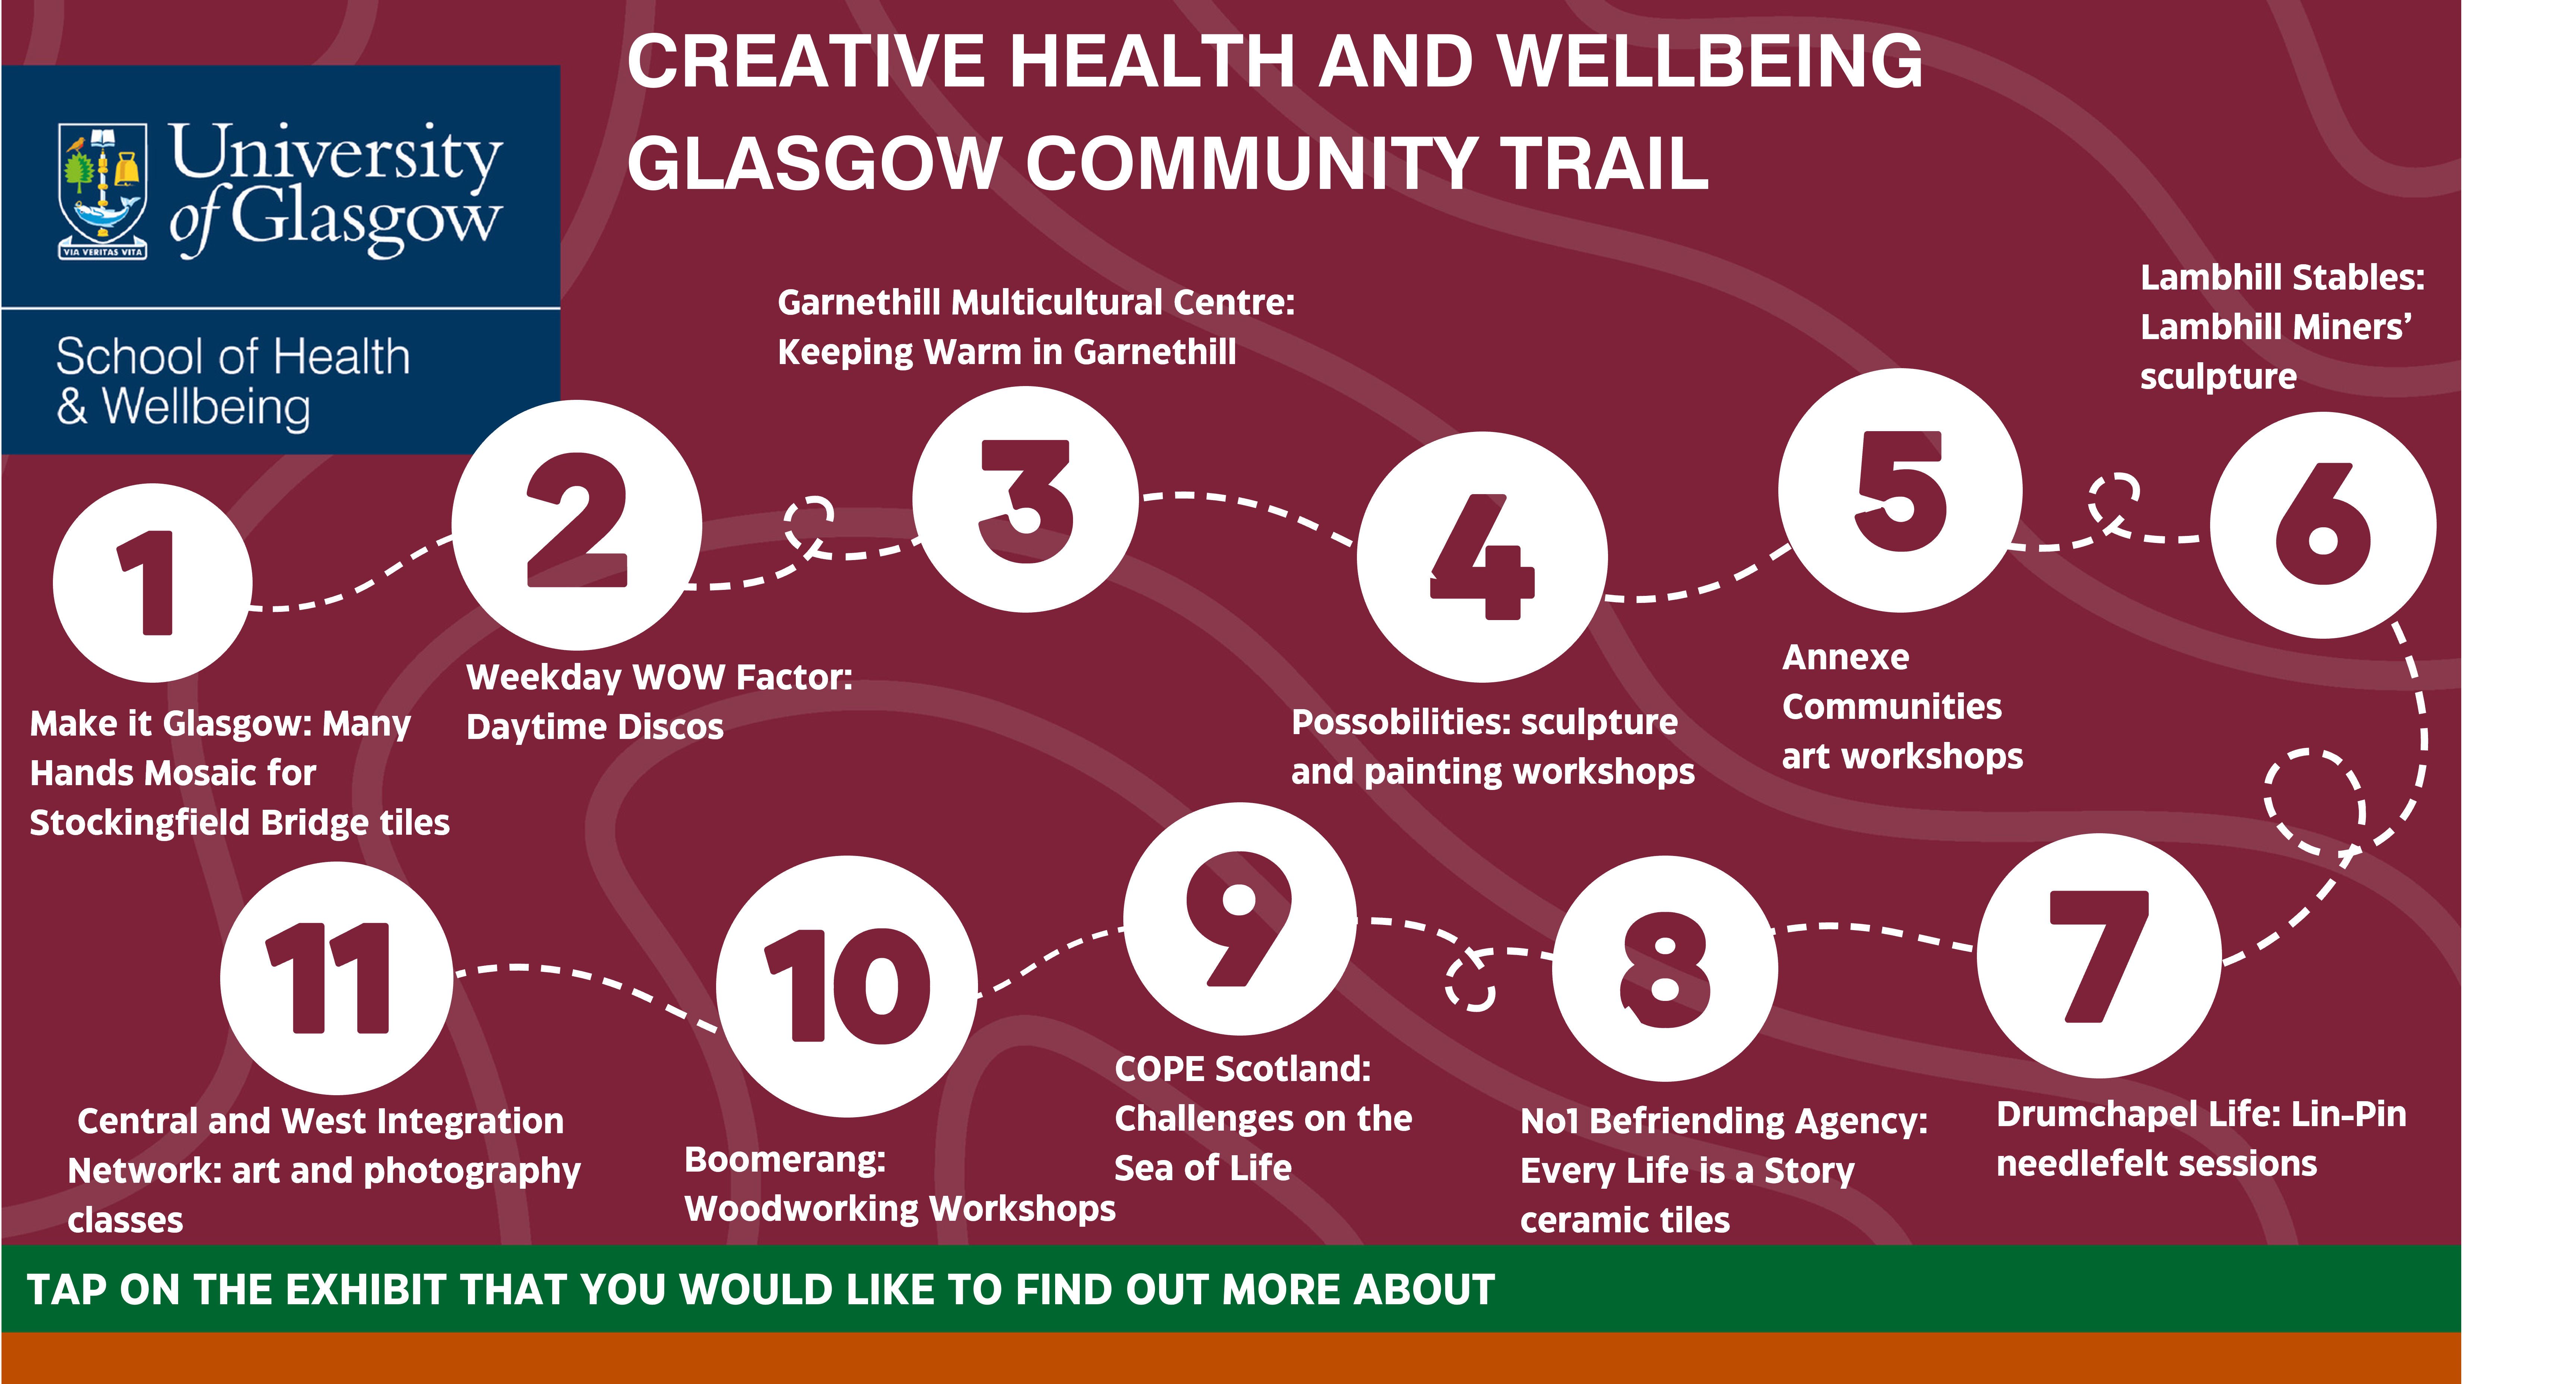 Image of the Creative Health and Wellbeing Glasgow Community Trail